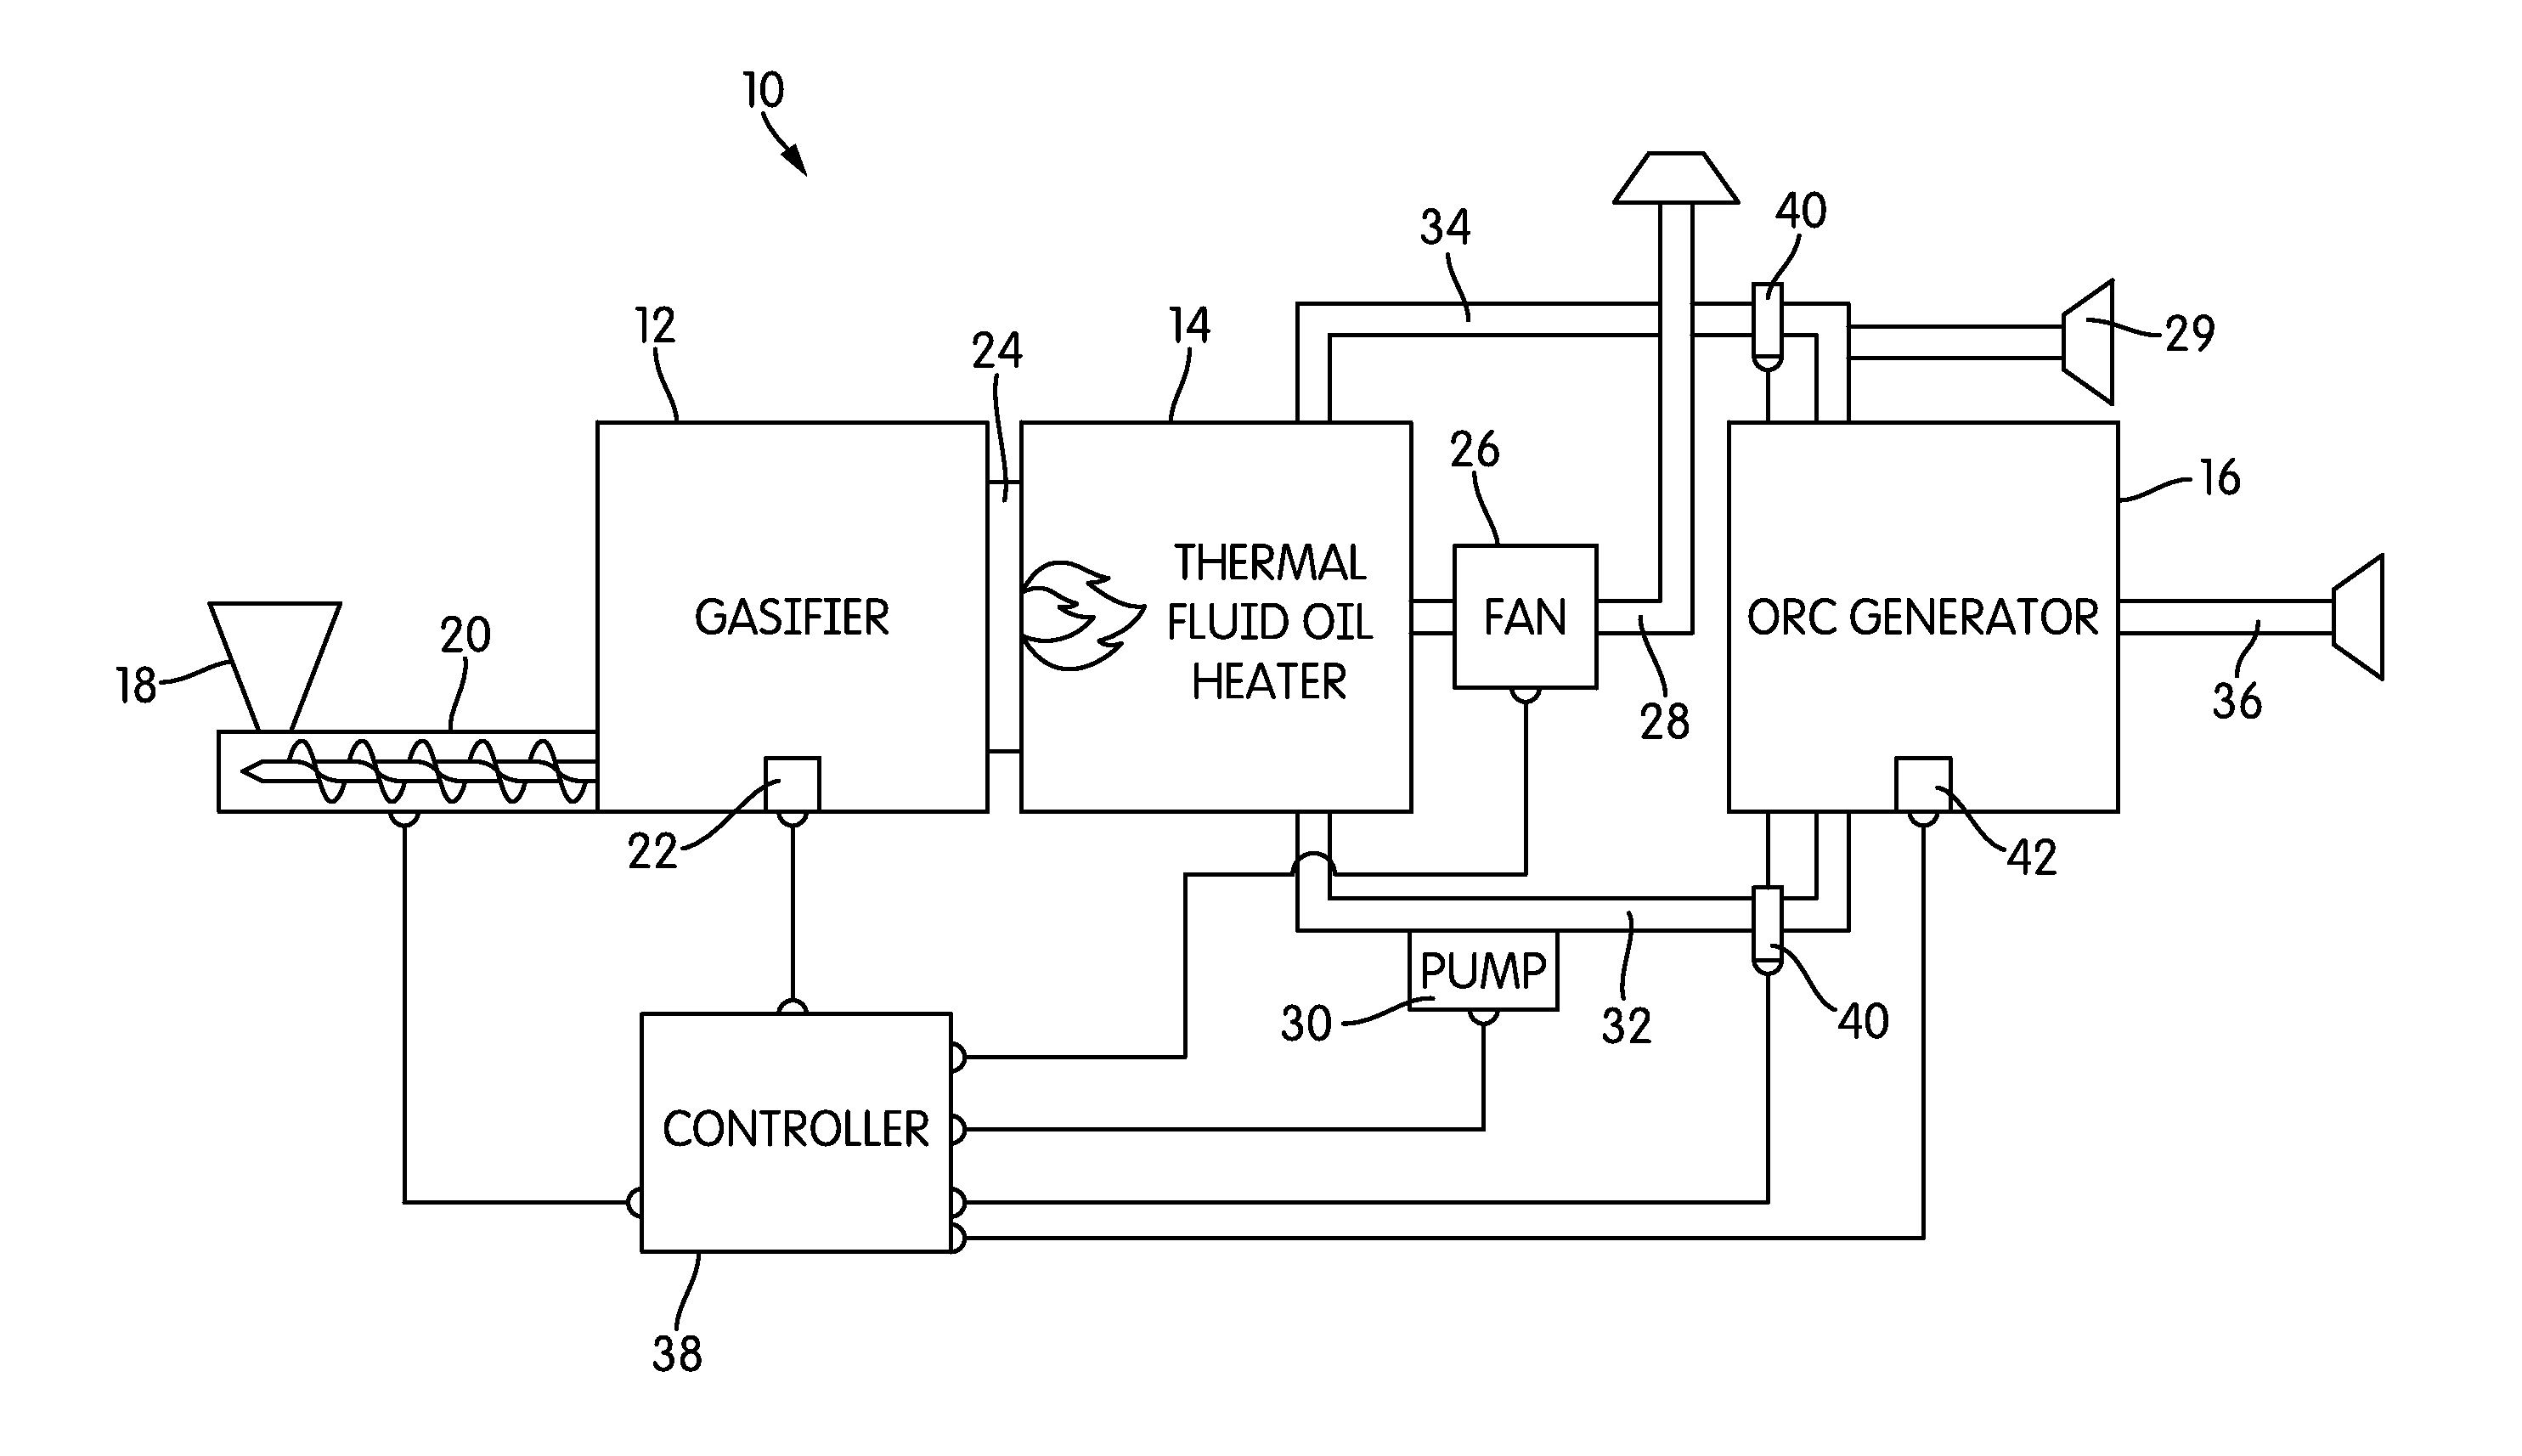 Systems and Methods for Electric and Heat Generation from Biomass